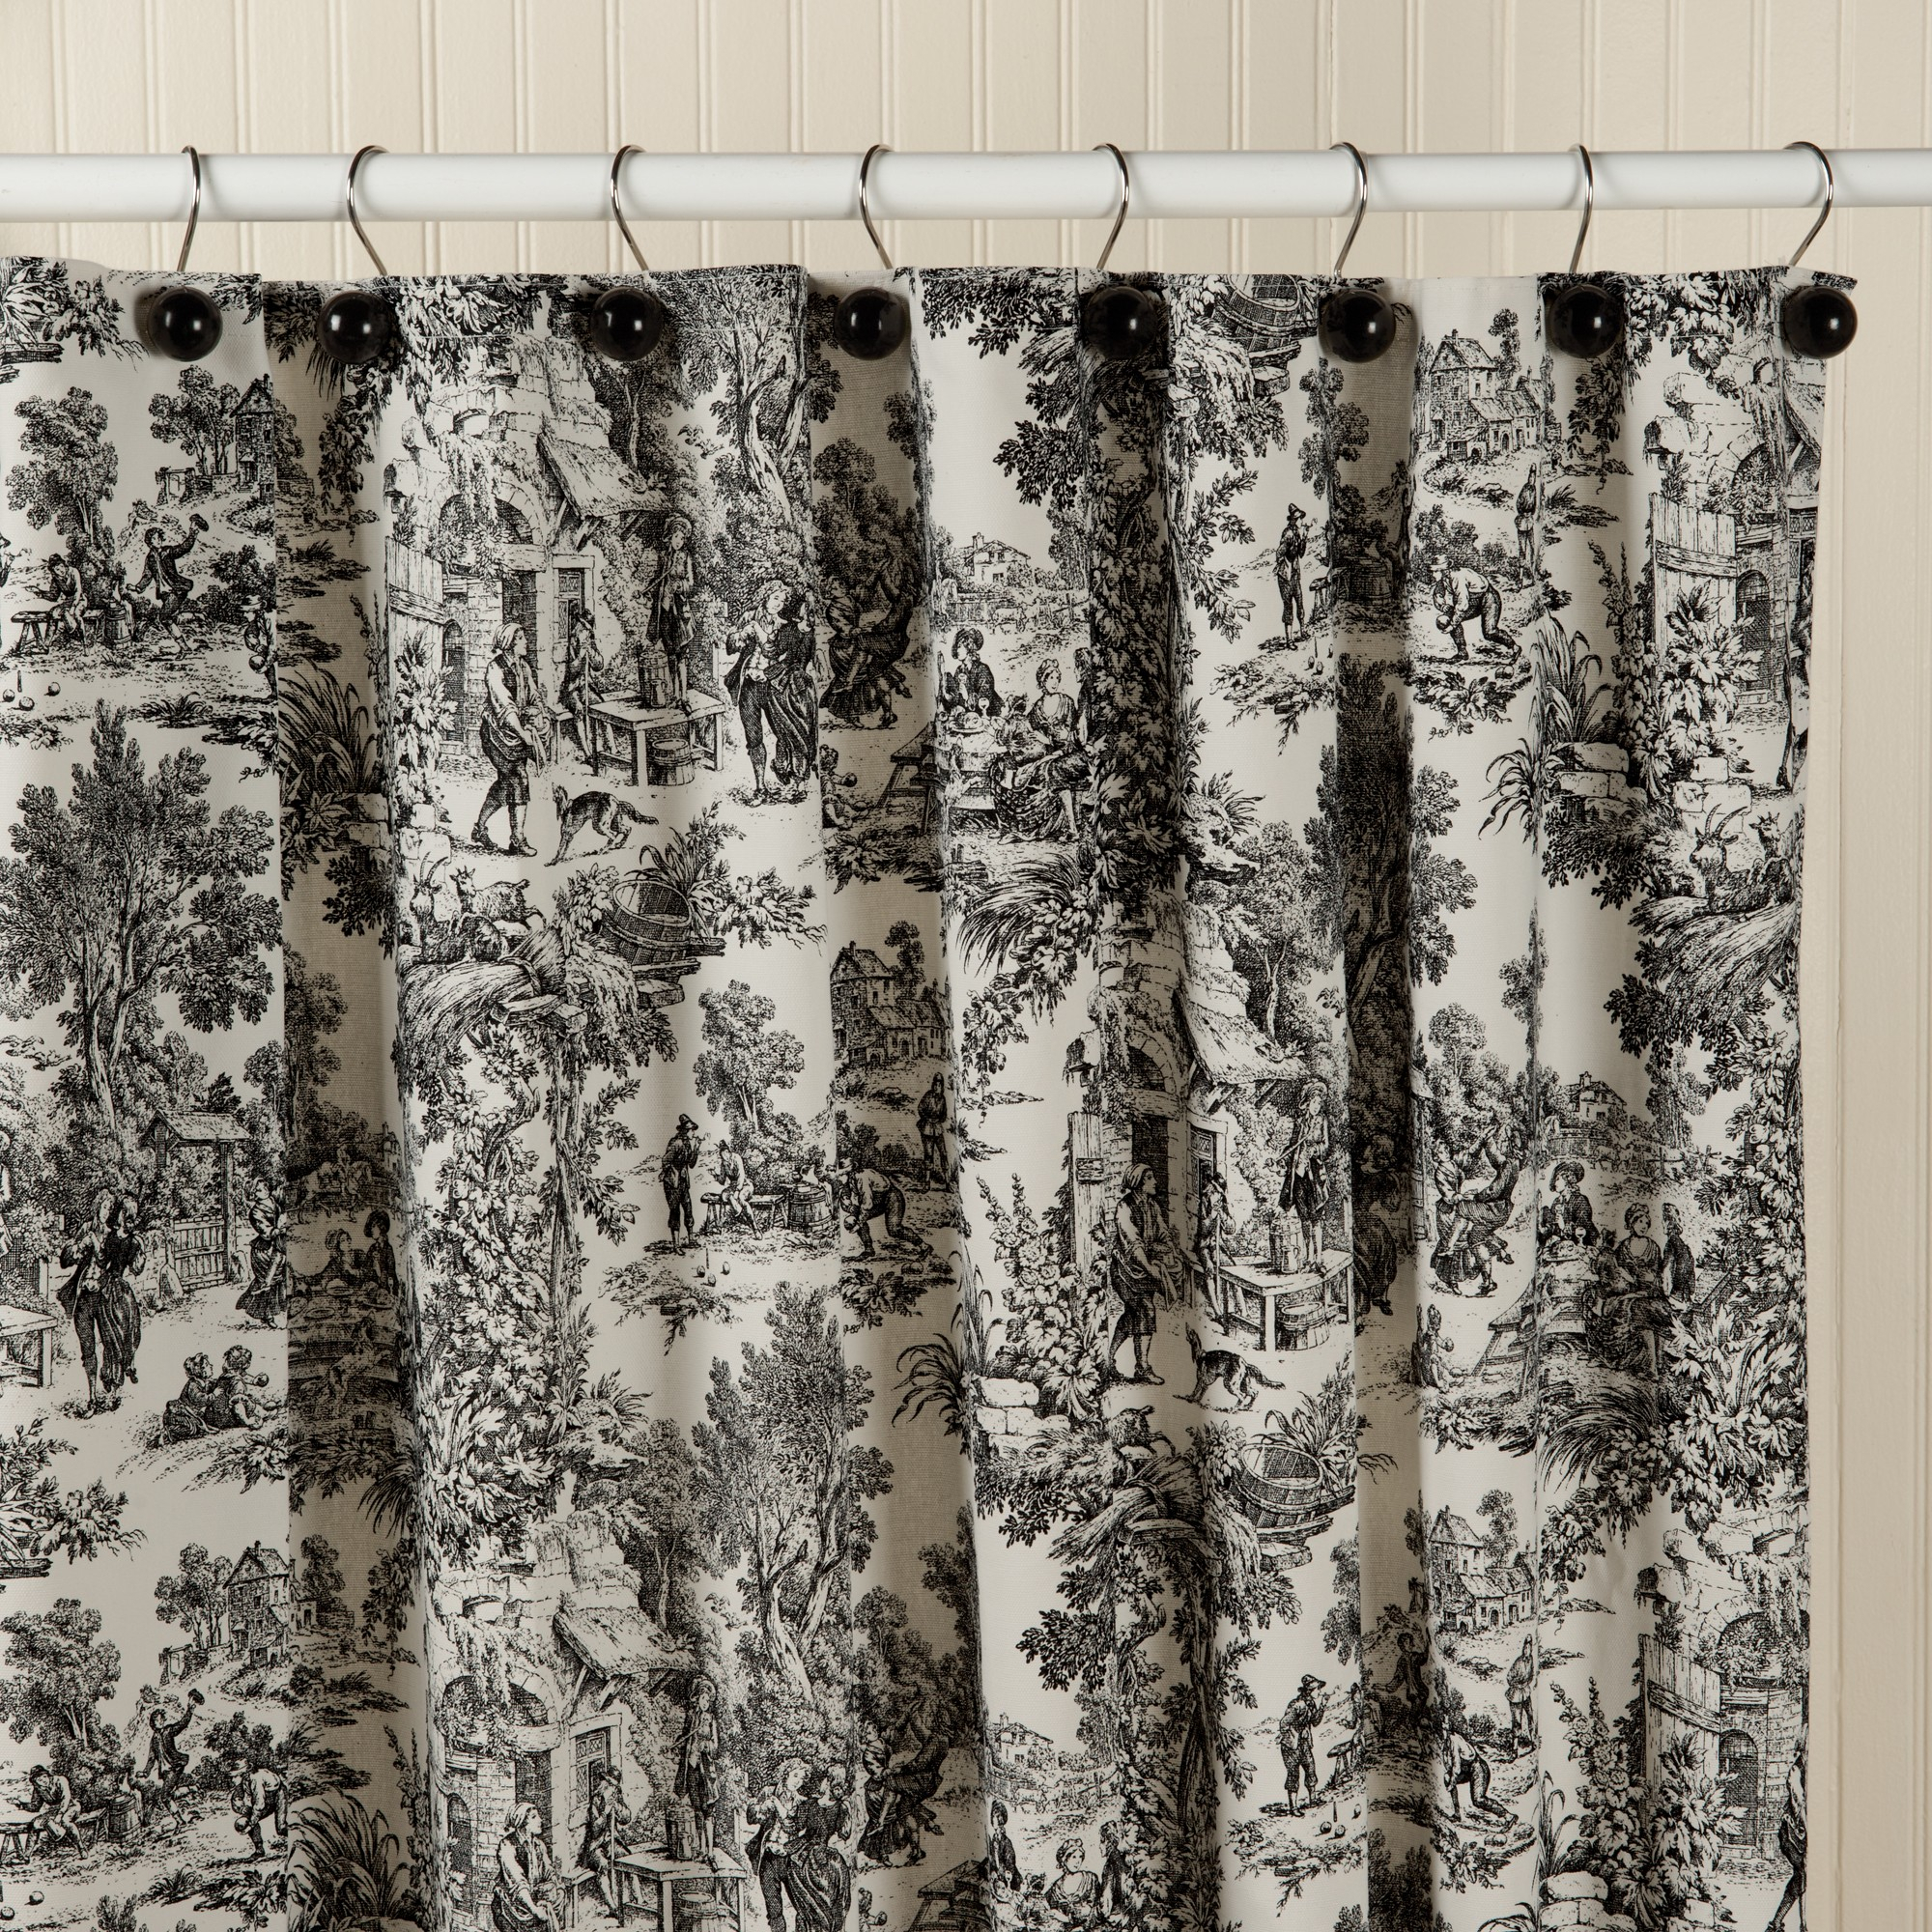 Toile shower curtain